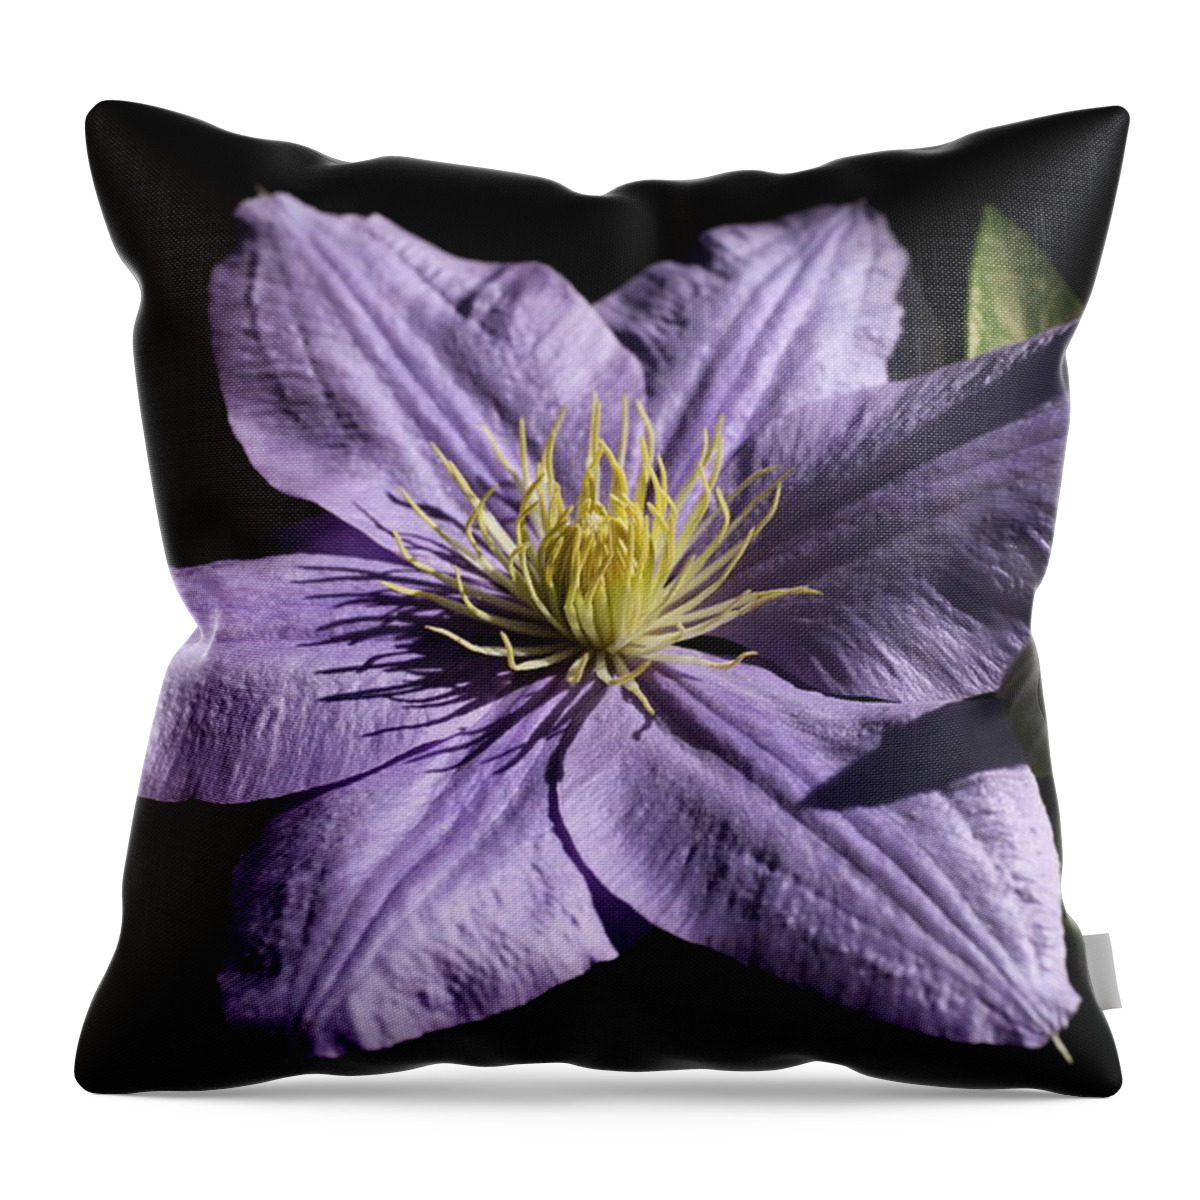 Abundant Throw Pillow featuring the photograph Bonanza Clematis by Tammy Pool